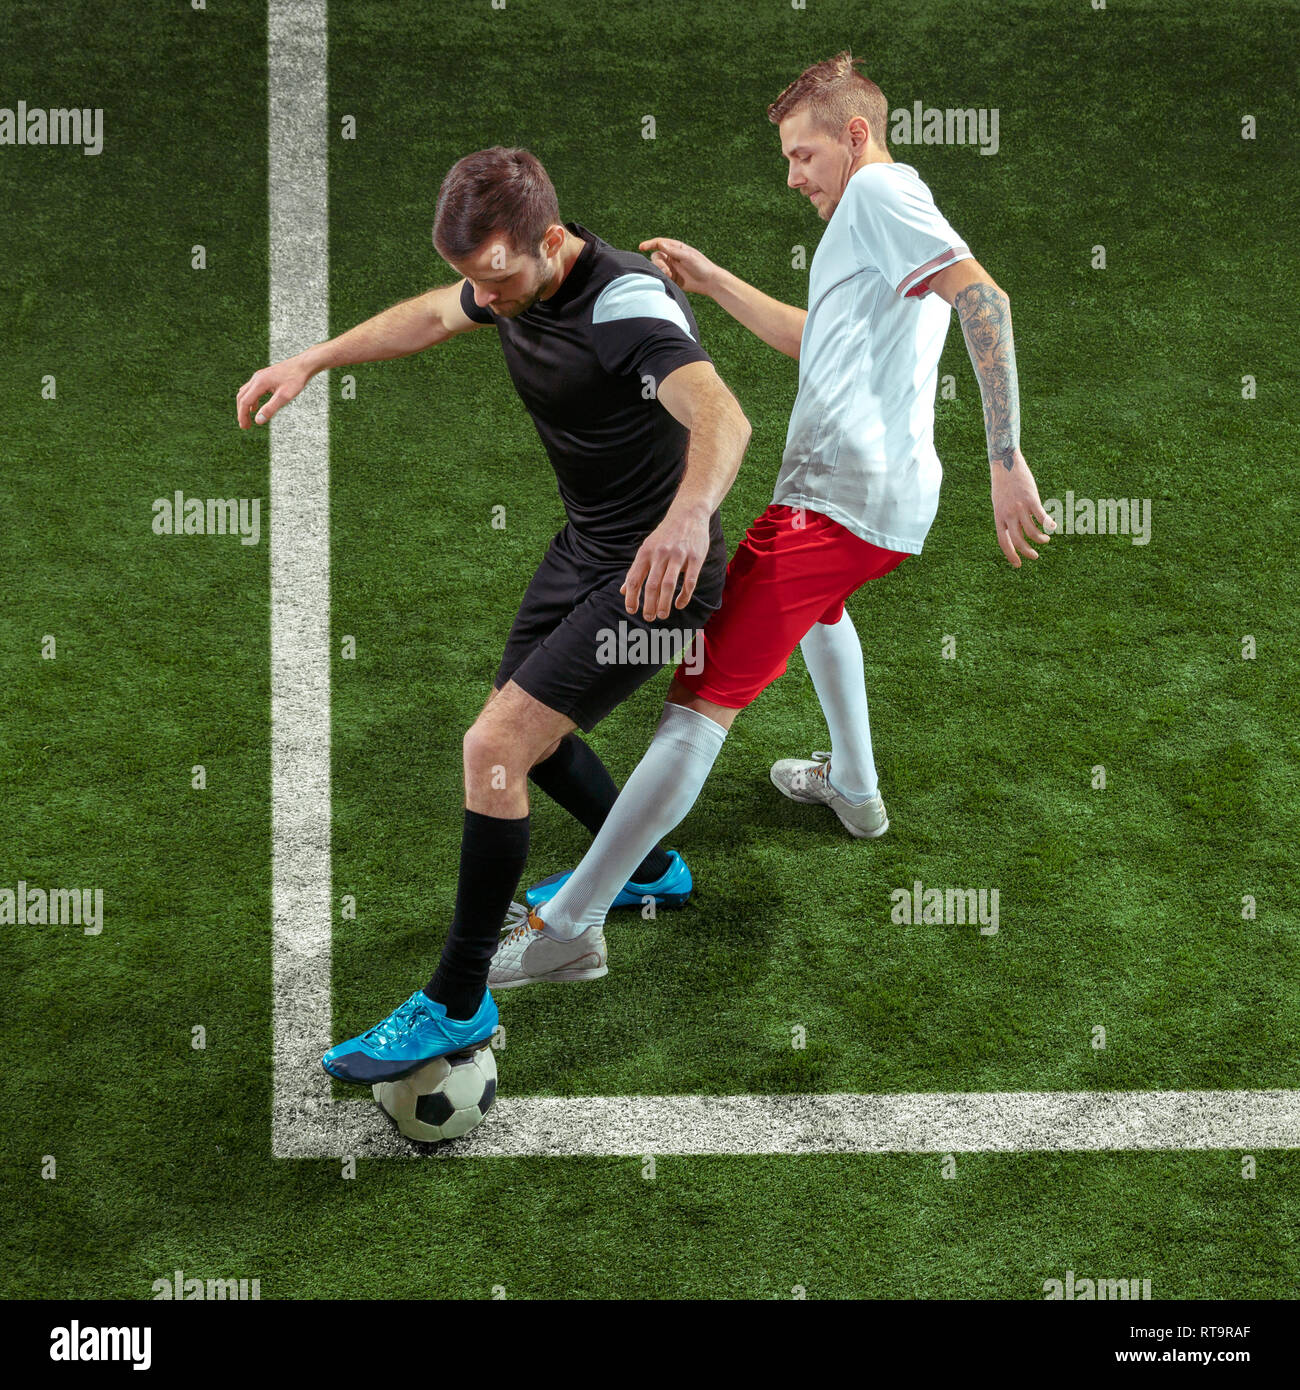 Professional football or soccer player in action on stadium with